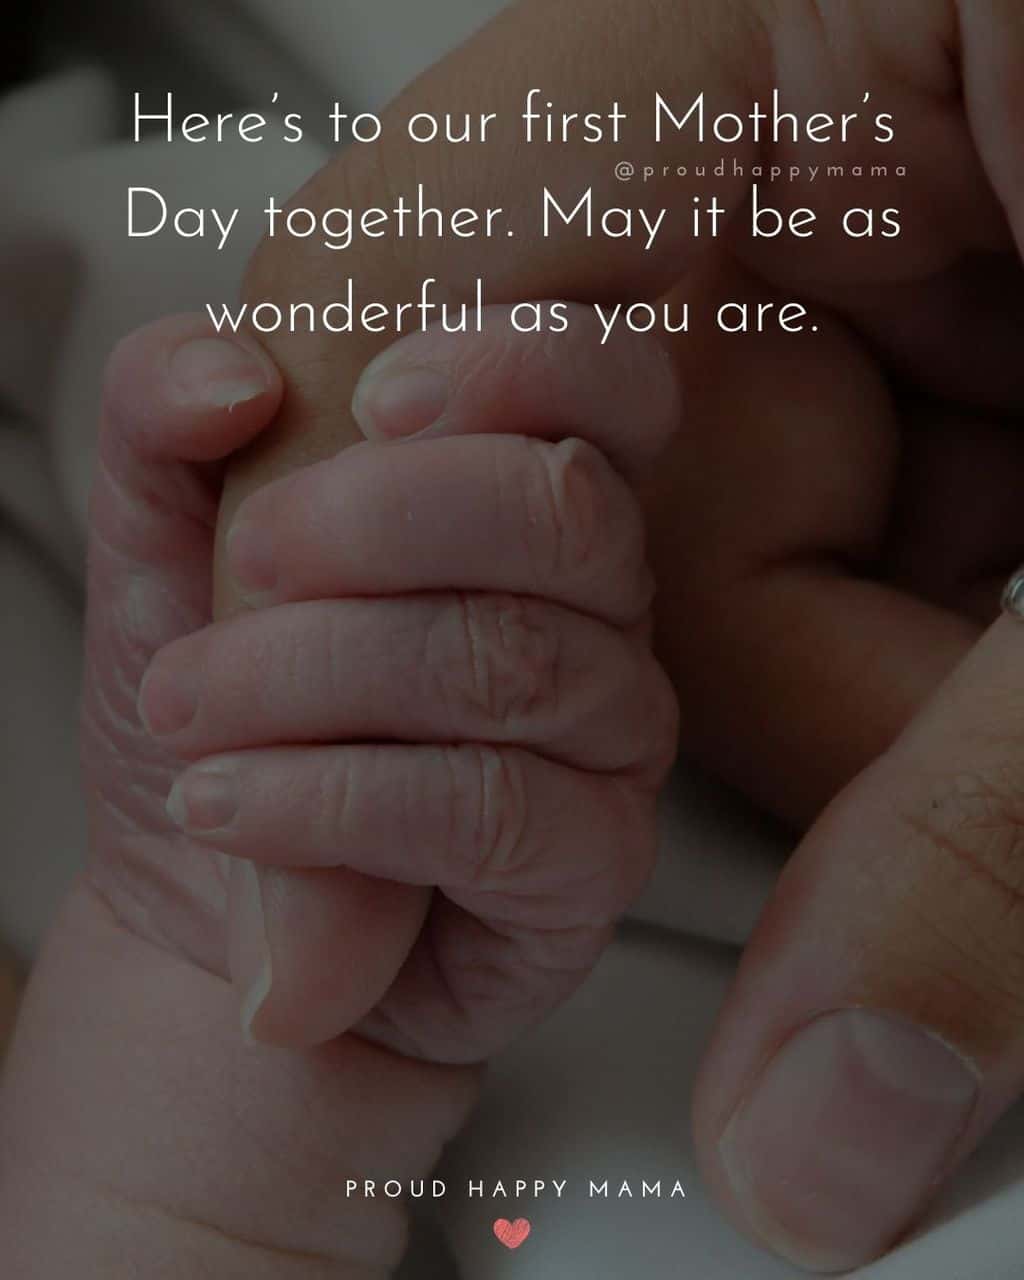 First Mothers Day Quotes - Here’s to our first Mother’s Day together. May it be as wonderful as you are.’